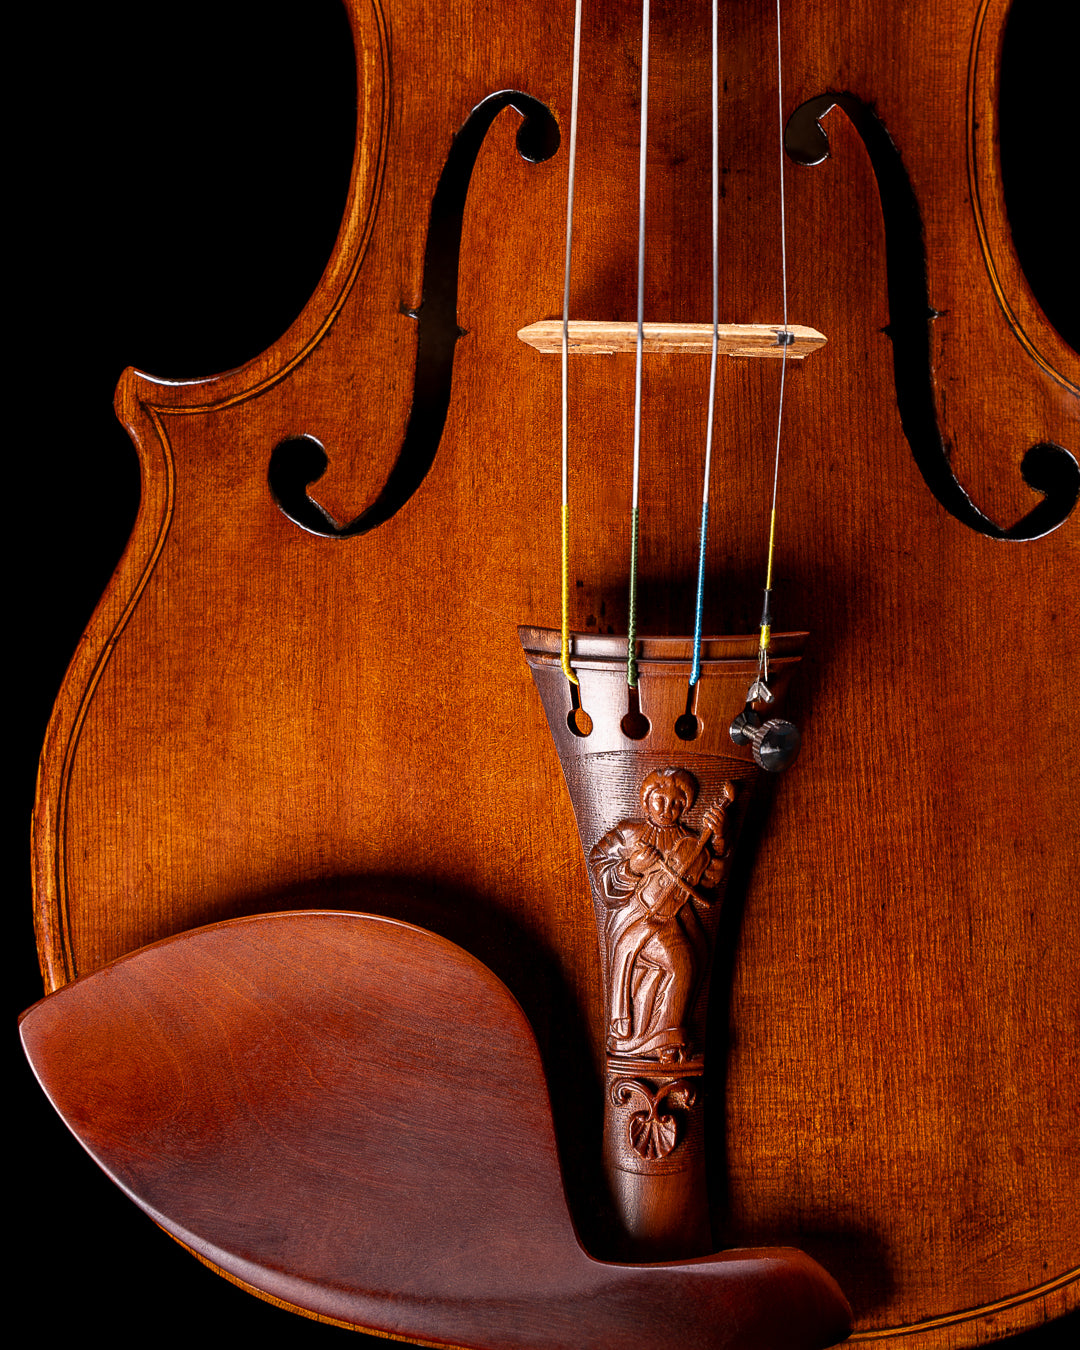 A Hellweg & Cloutier replica of Jean-Baptiste Vuillaume’s “Lady Blunt” tailpiece, depicted here in Mountain Mahogany wood.